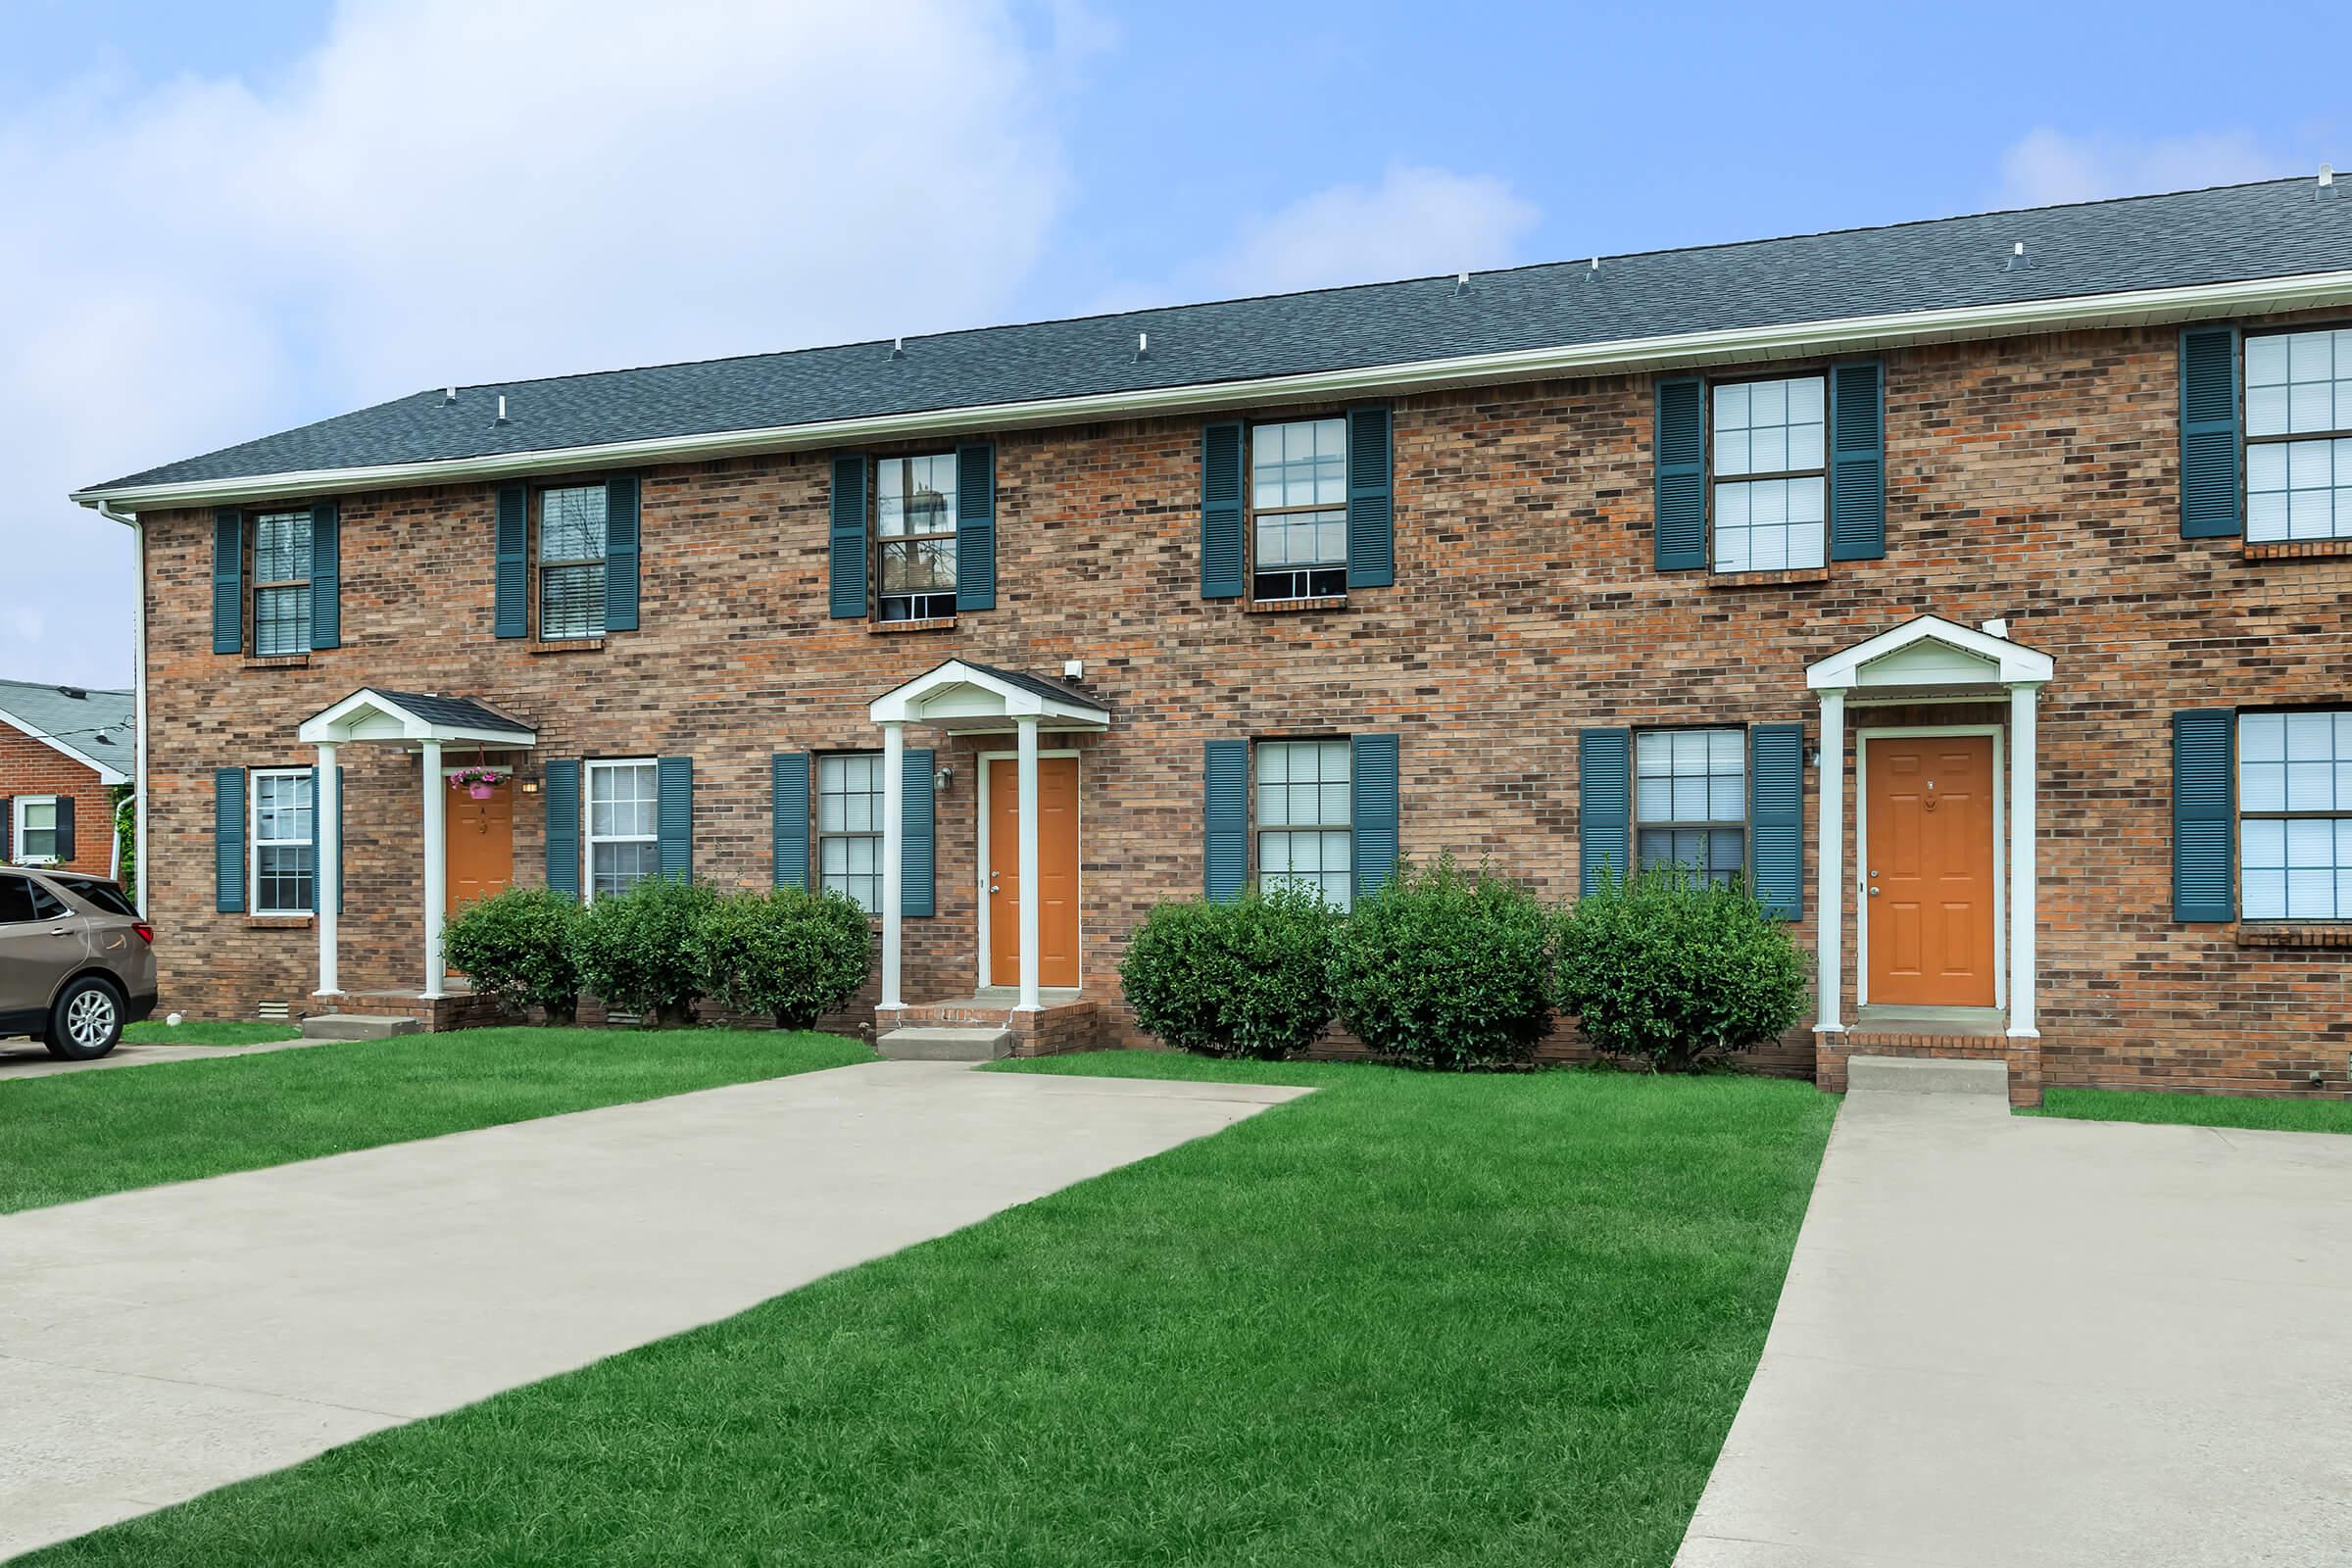 APARTMENTS FOR RENT IN CLARKSVILLE, TN